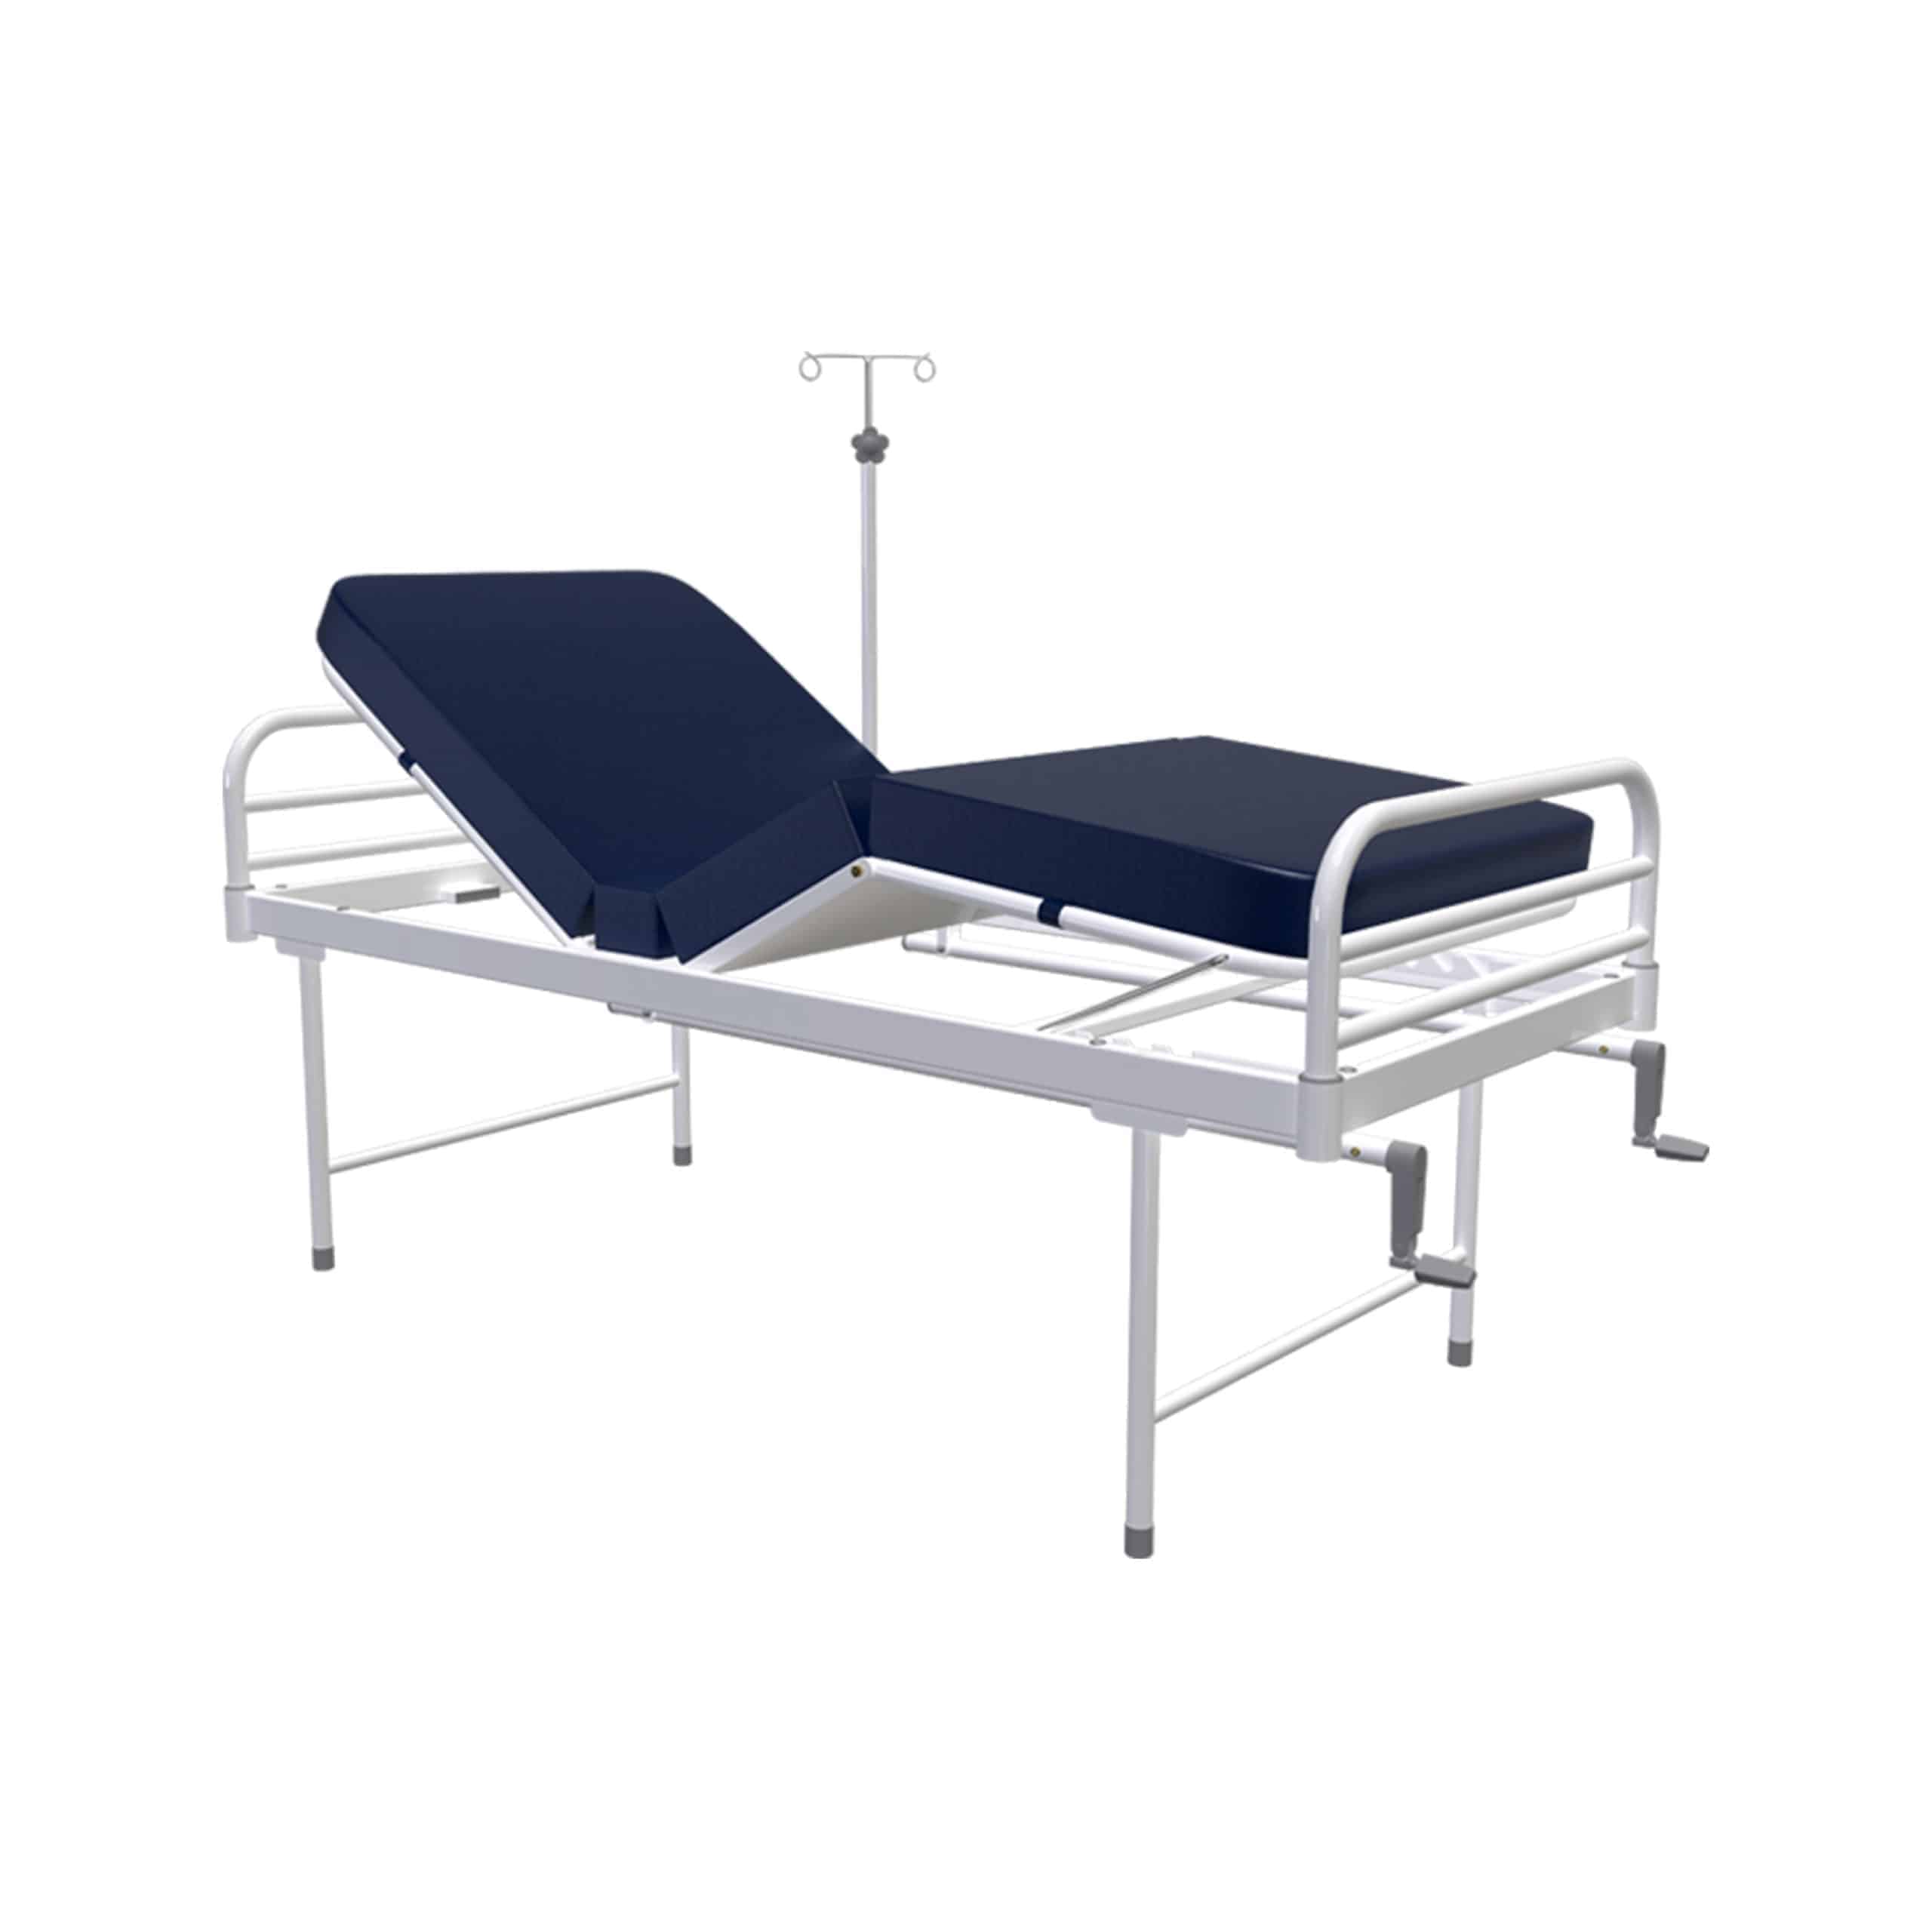 White colour Medical Examination Couch with Blue bed and saline stand attached to it under white background